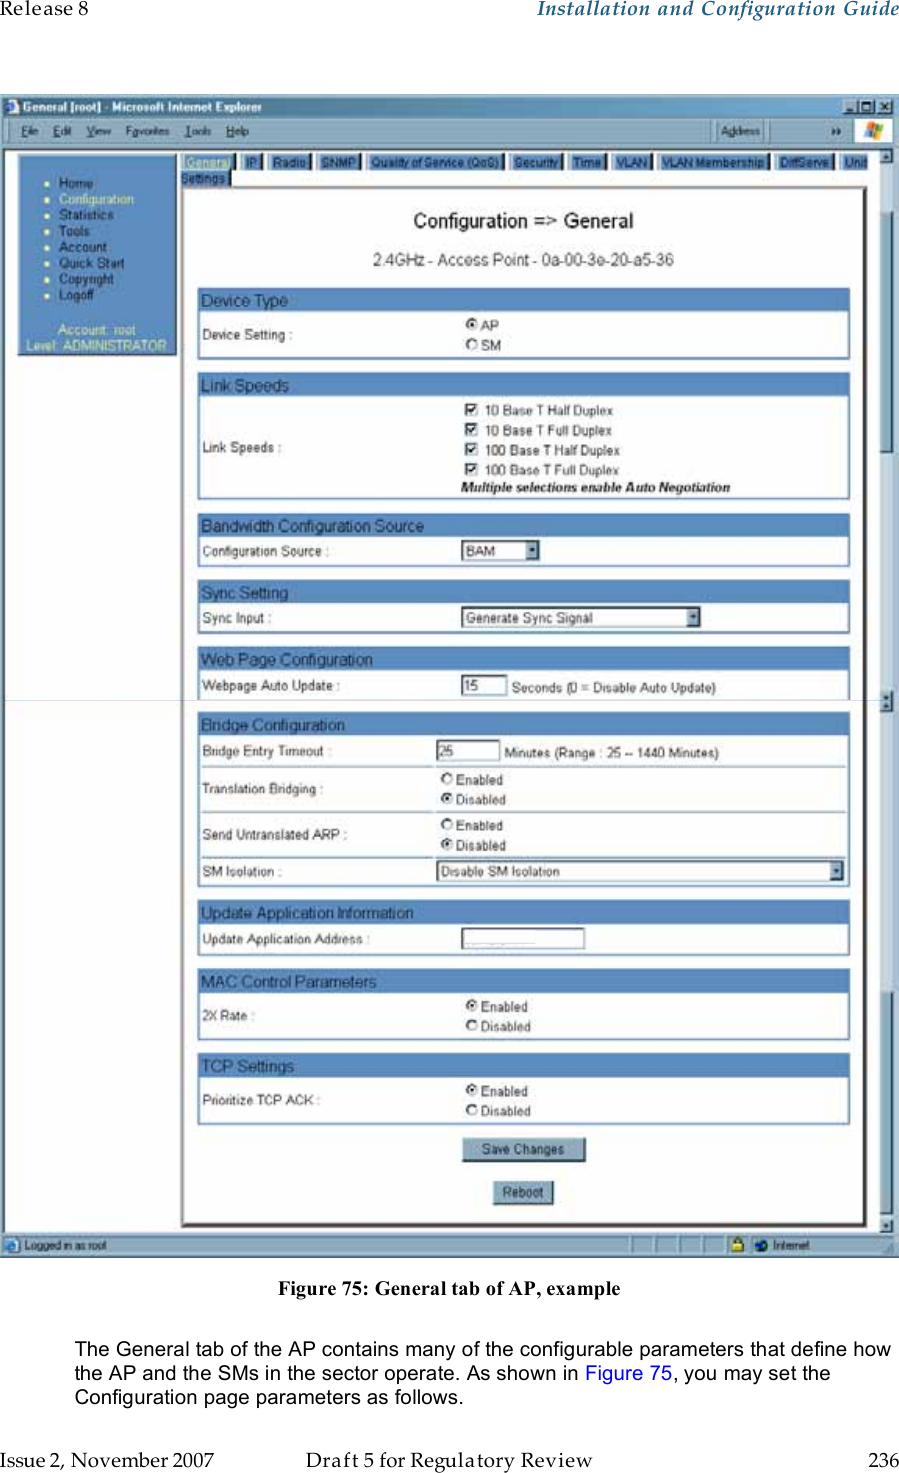 Release 8    Installation and Configuration Guide   Issue 2, November 2007  Draft 5 for Regulatory Review  236        Figure 75: General tab of AP, example  The General tab of the AP contains many of the configurable parameters that define how the AP and the SMs in the sector operate. As shown in Figure 75, you may set the Configuration page parameters as follows. 